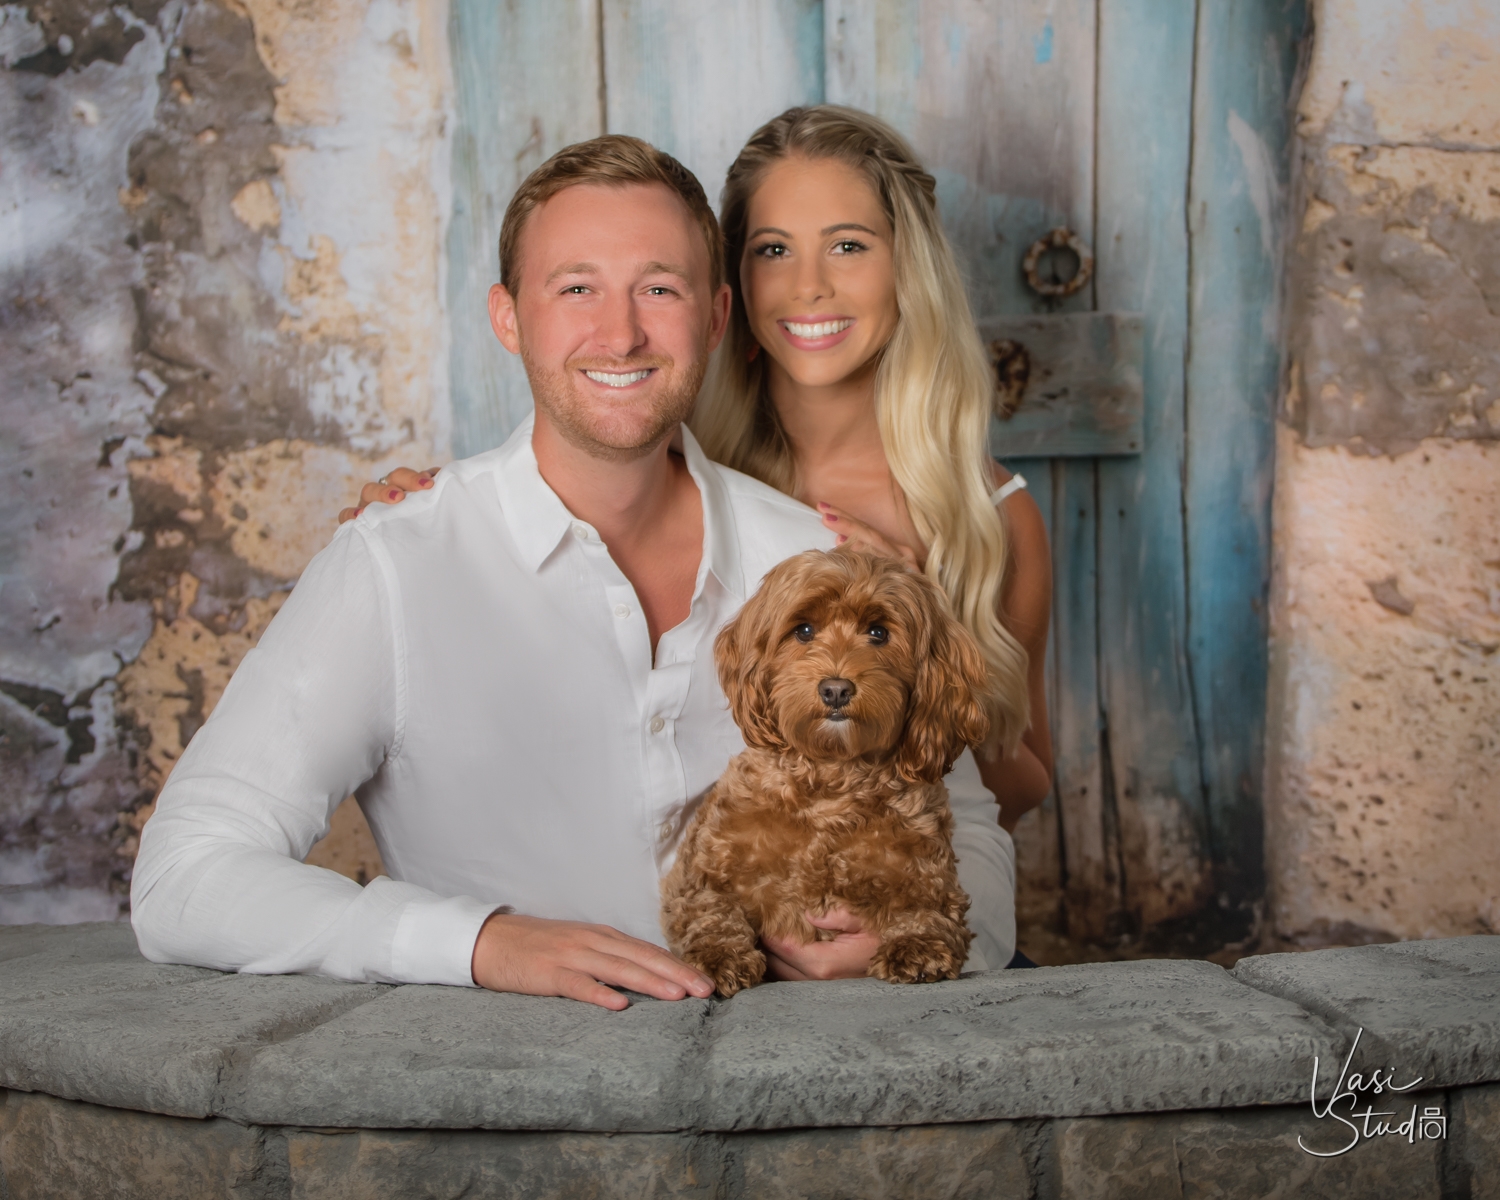 Studio session of a couple and their doggy. Call us today at 561-307-9875.